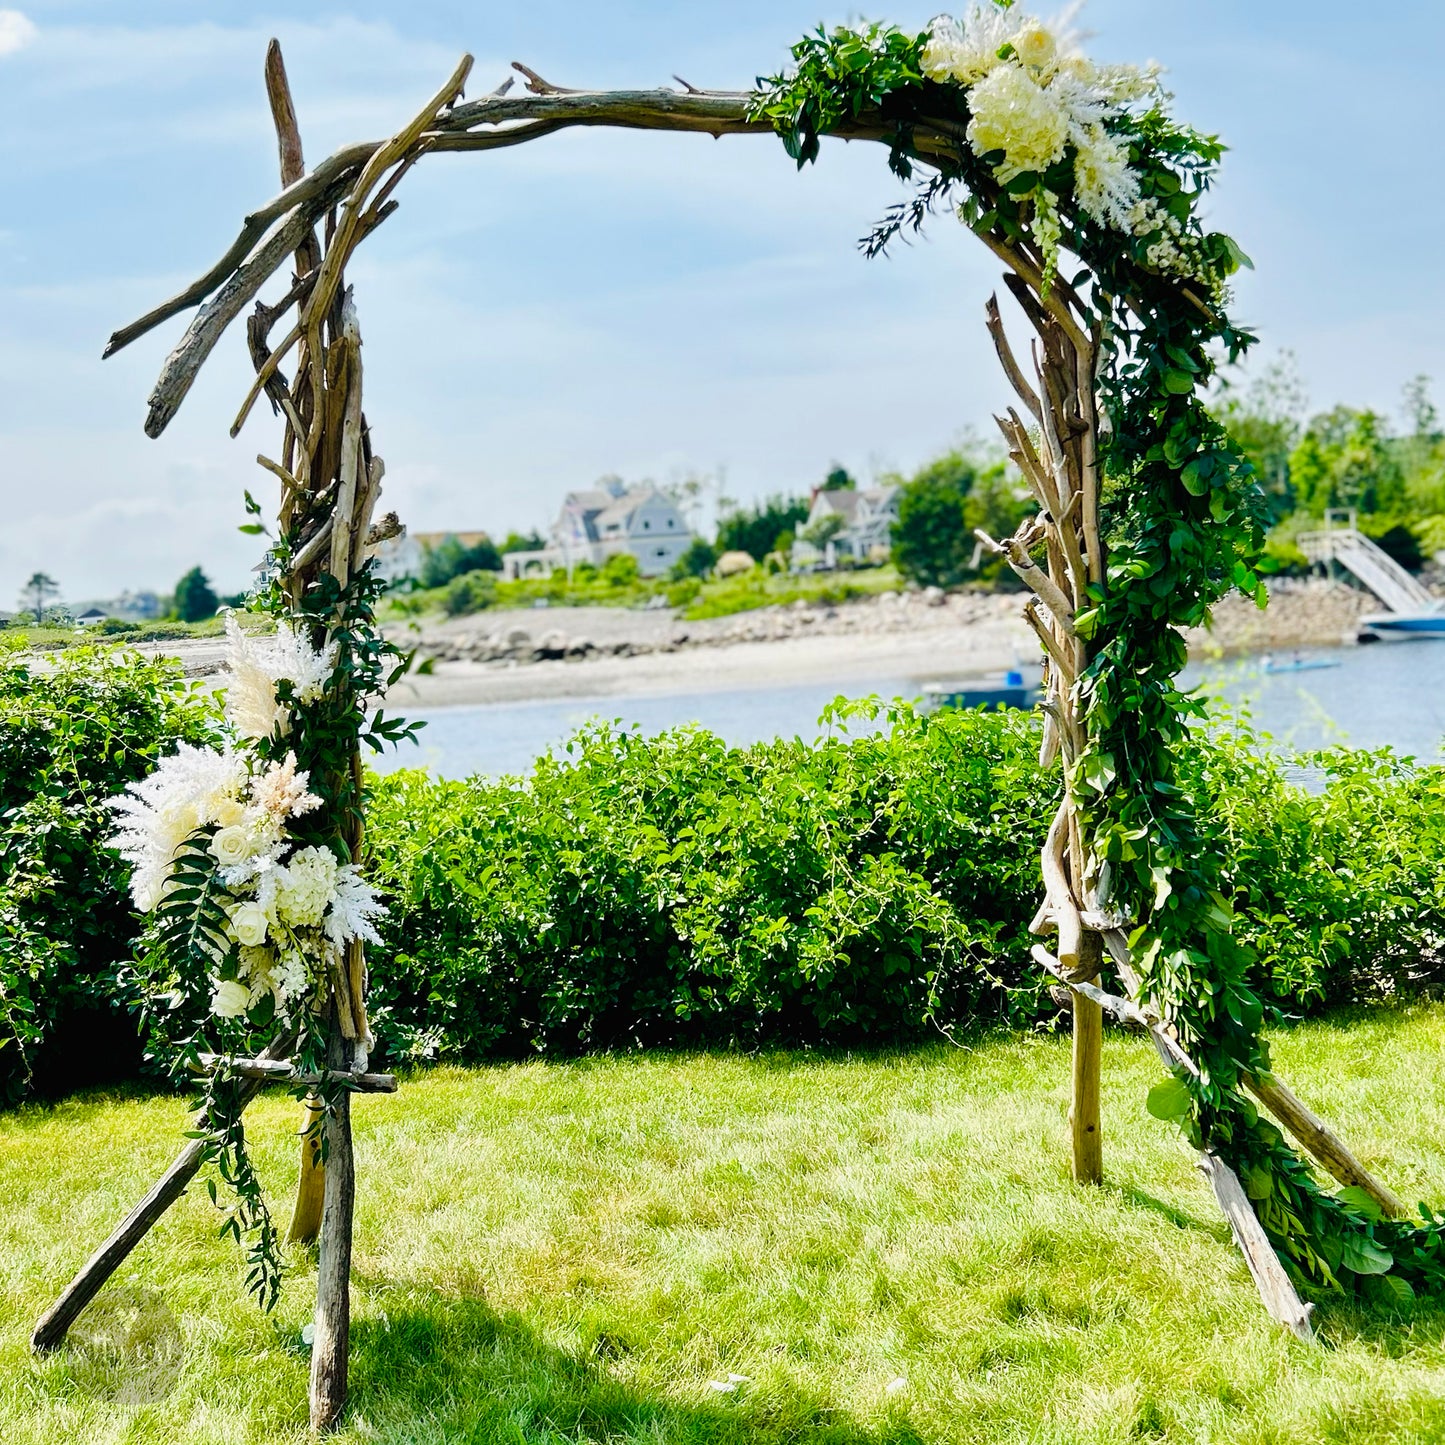 Chic Driftwood Wedding Arch - Curved Self-Standing Design for Unforgettable Ceremonies